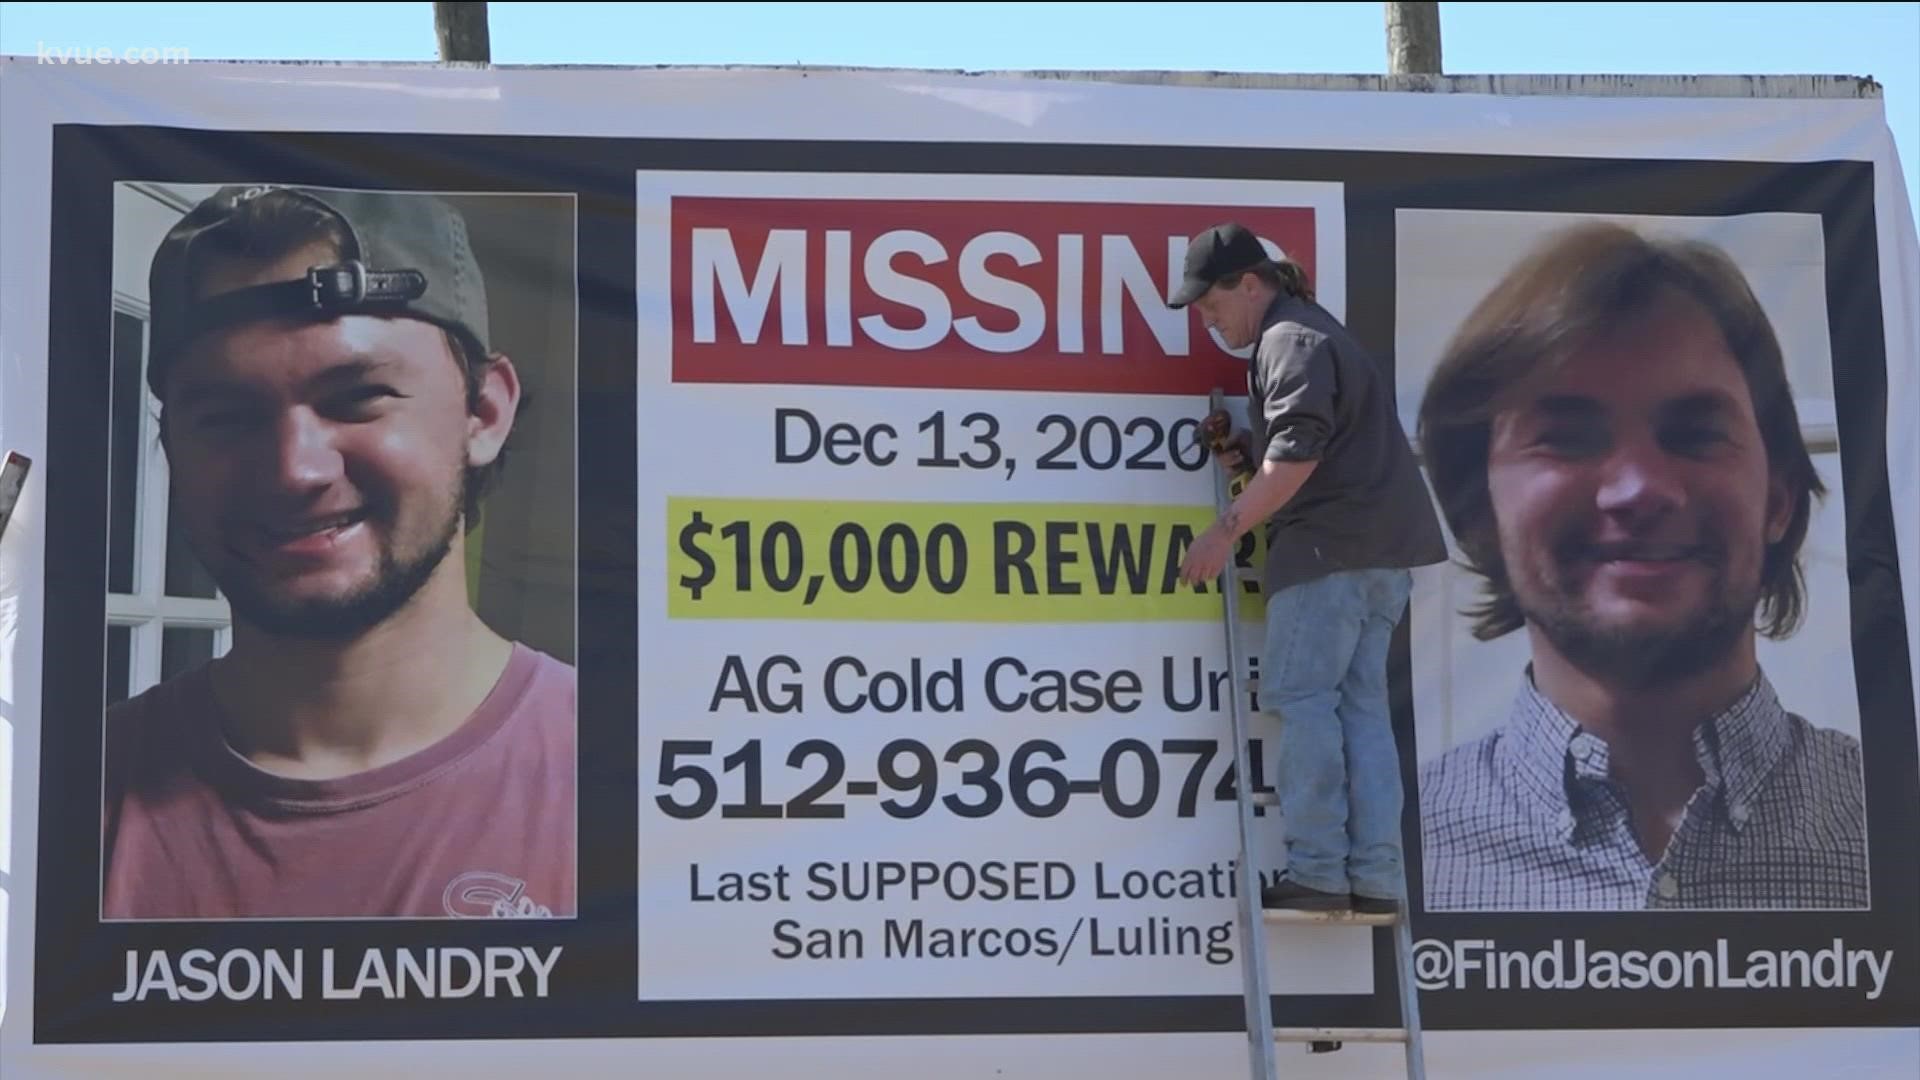 Volunteers came together to raise awareness about missing Texas State student Jason Landry.